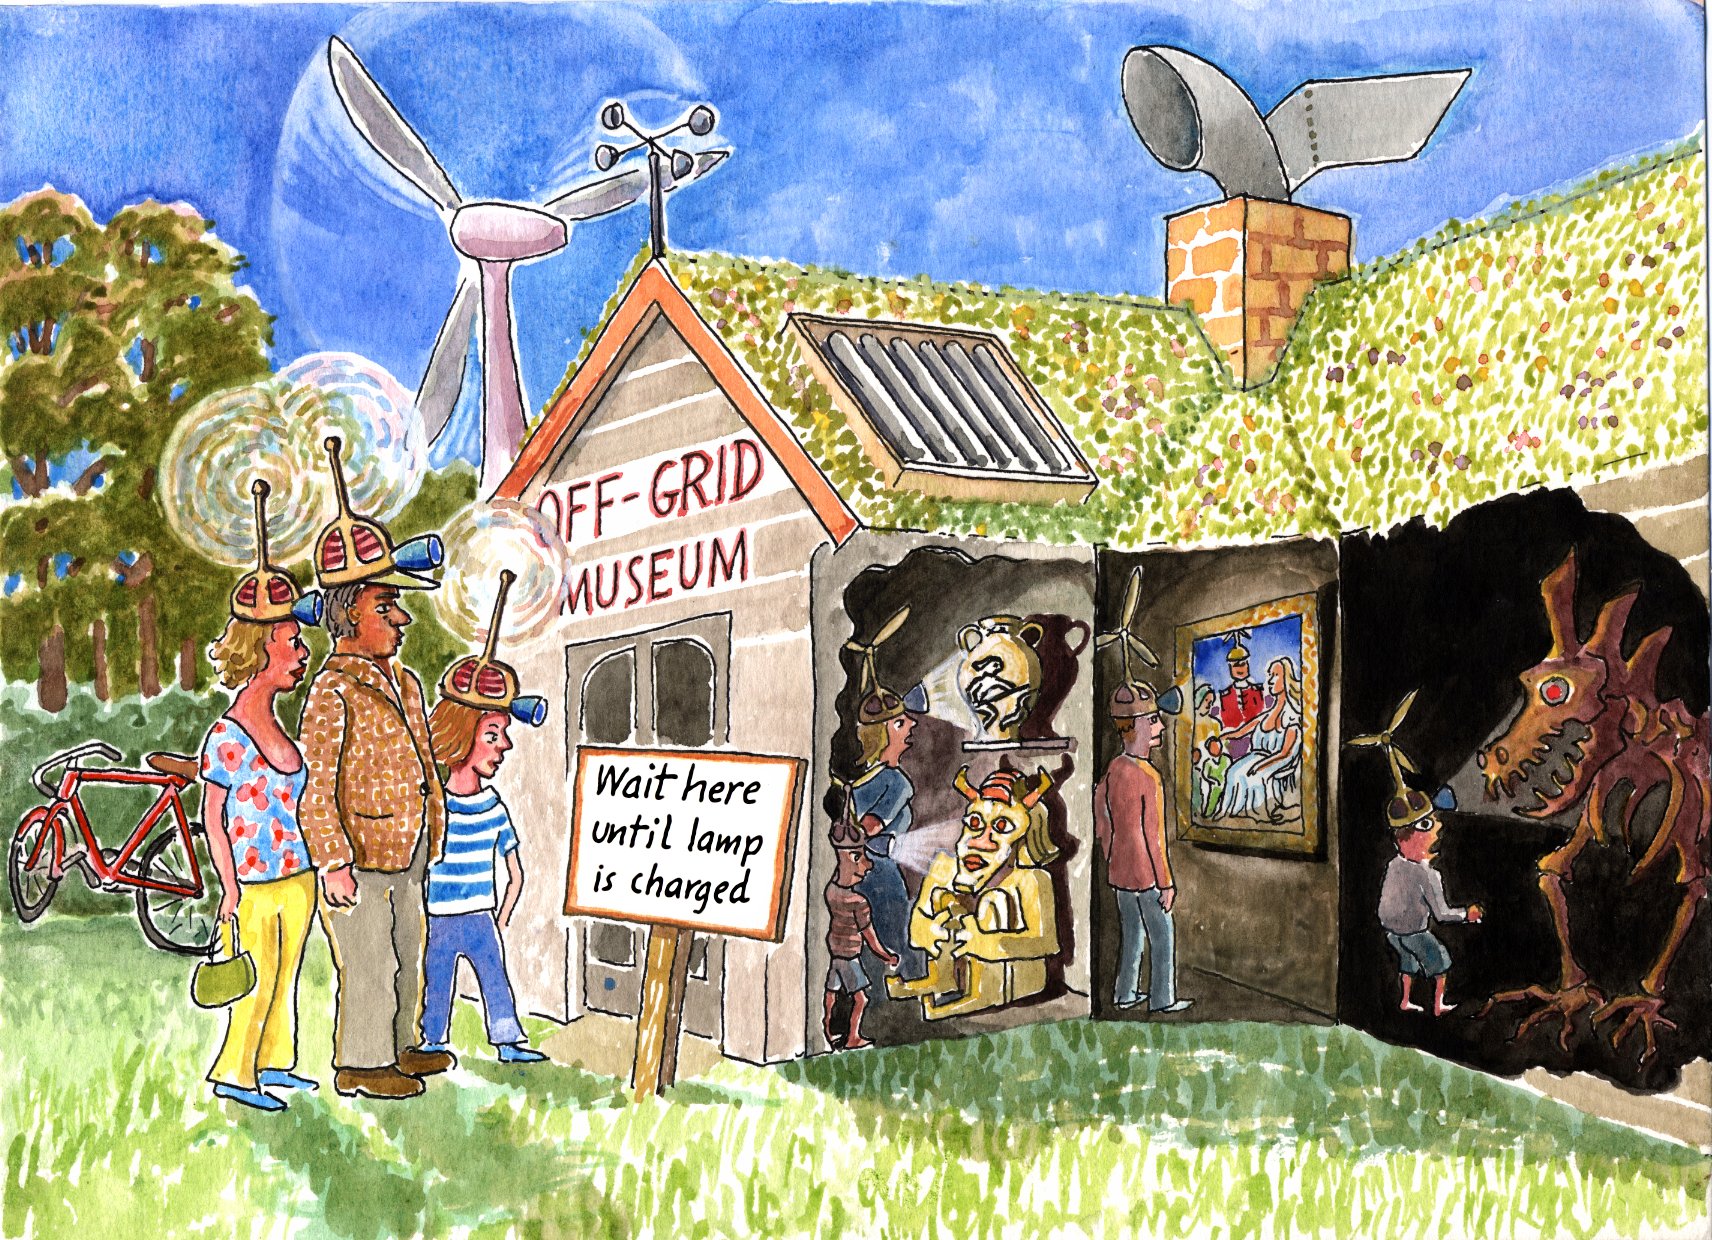 the off grid museum